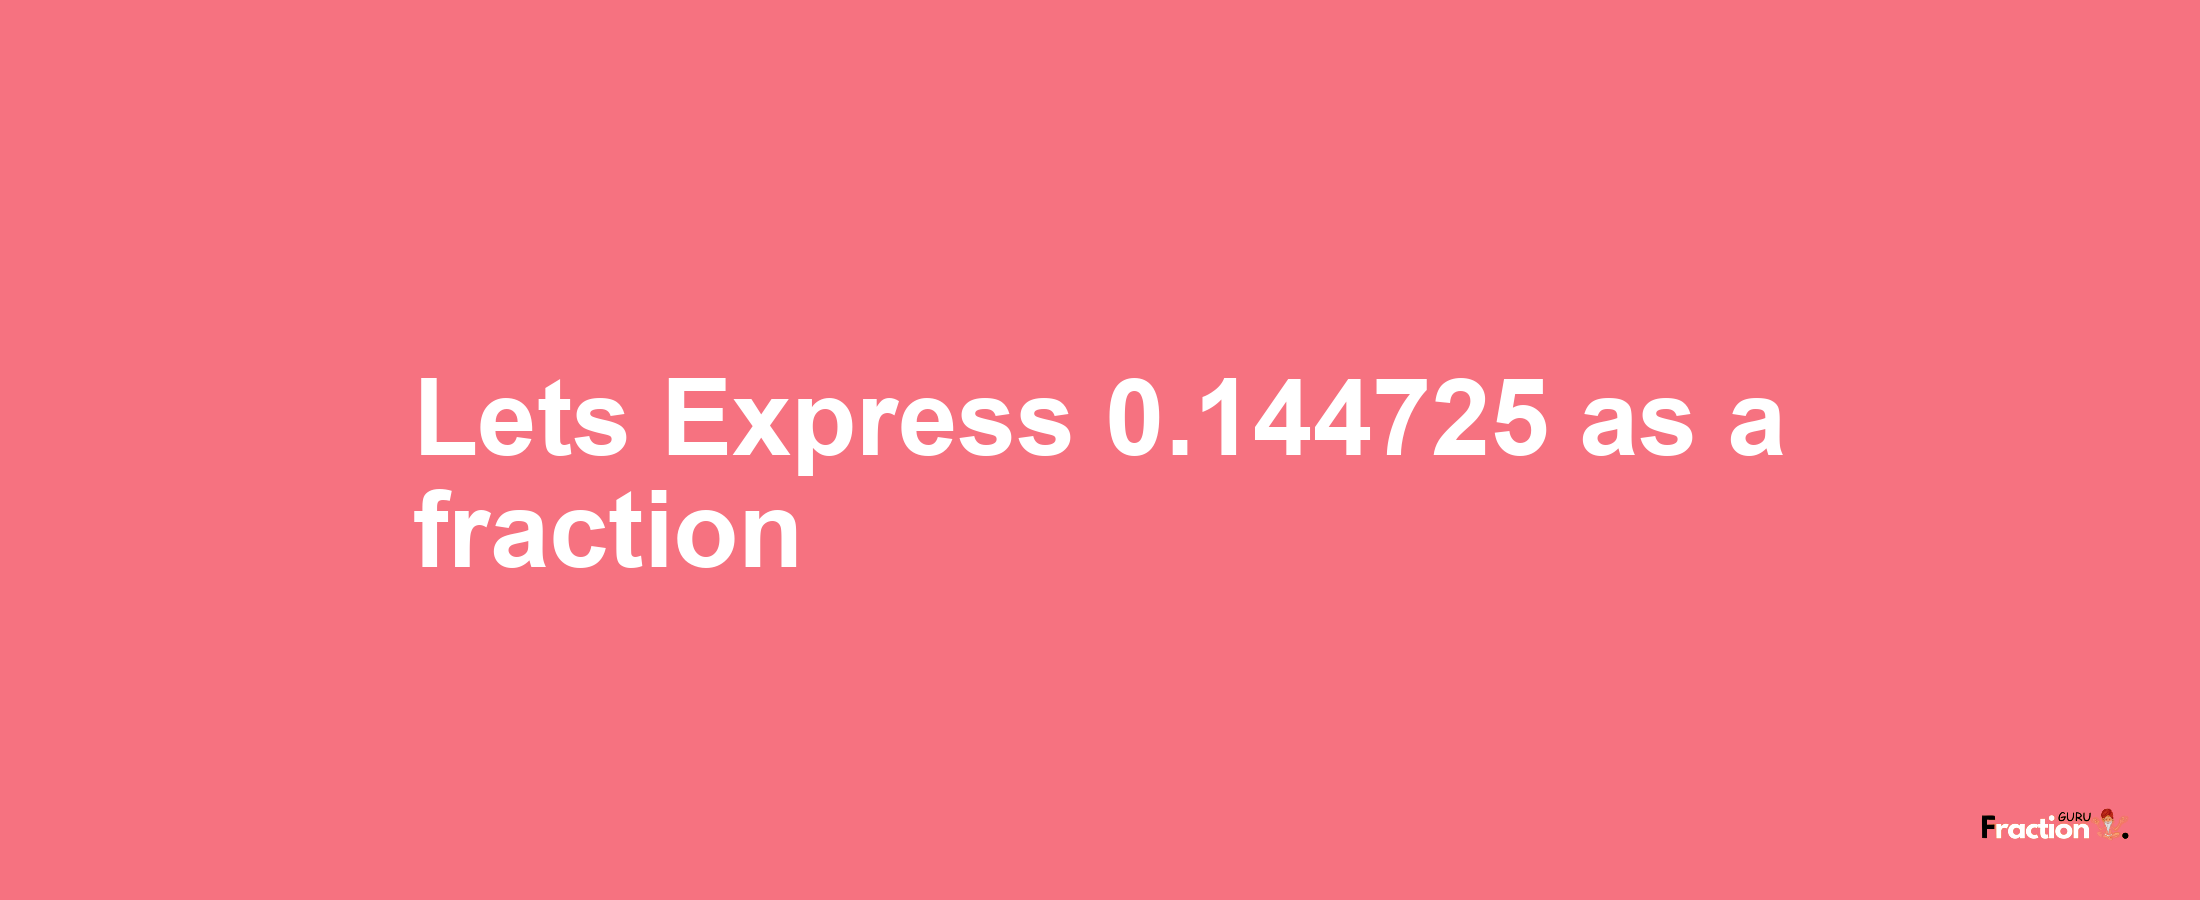 Lets Express 0.144725 as afraction